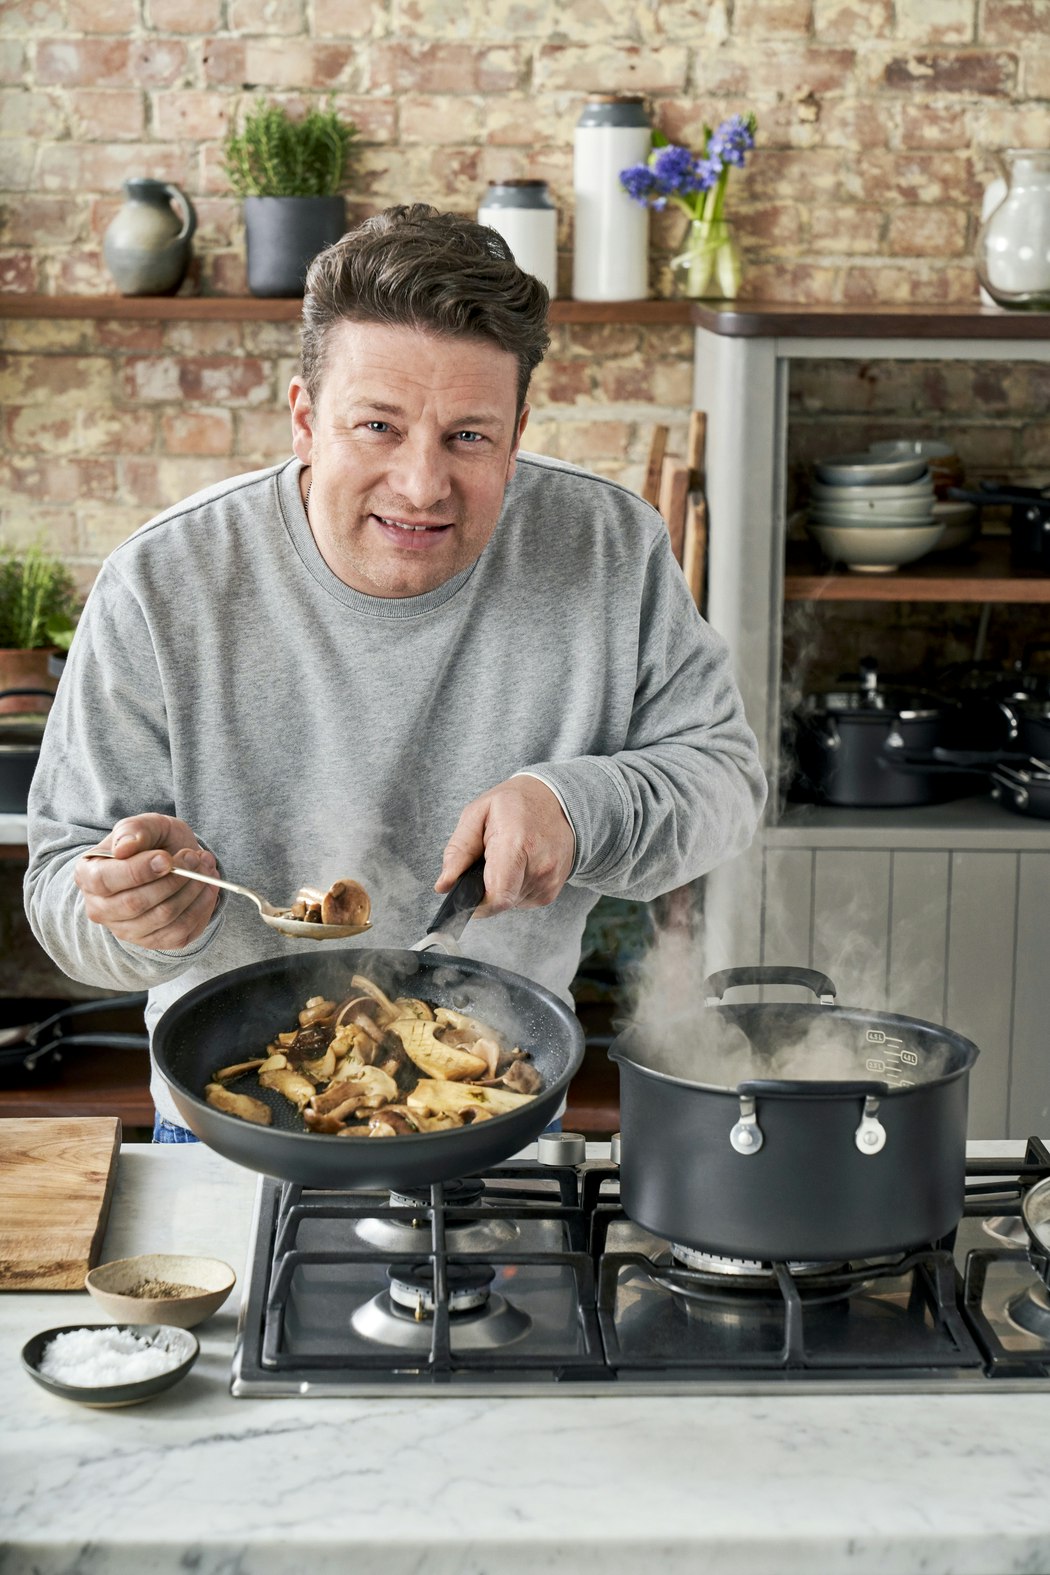 Jamie Oliver by Tefal Hard Anodised Aluminium Non-Stick All-In